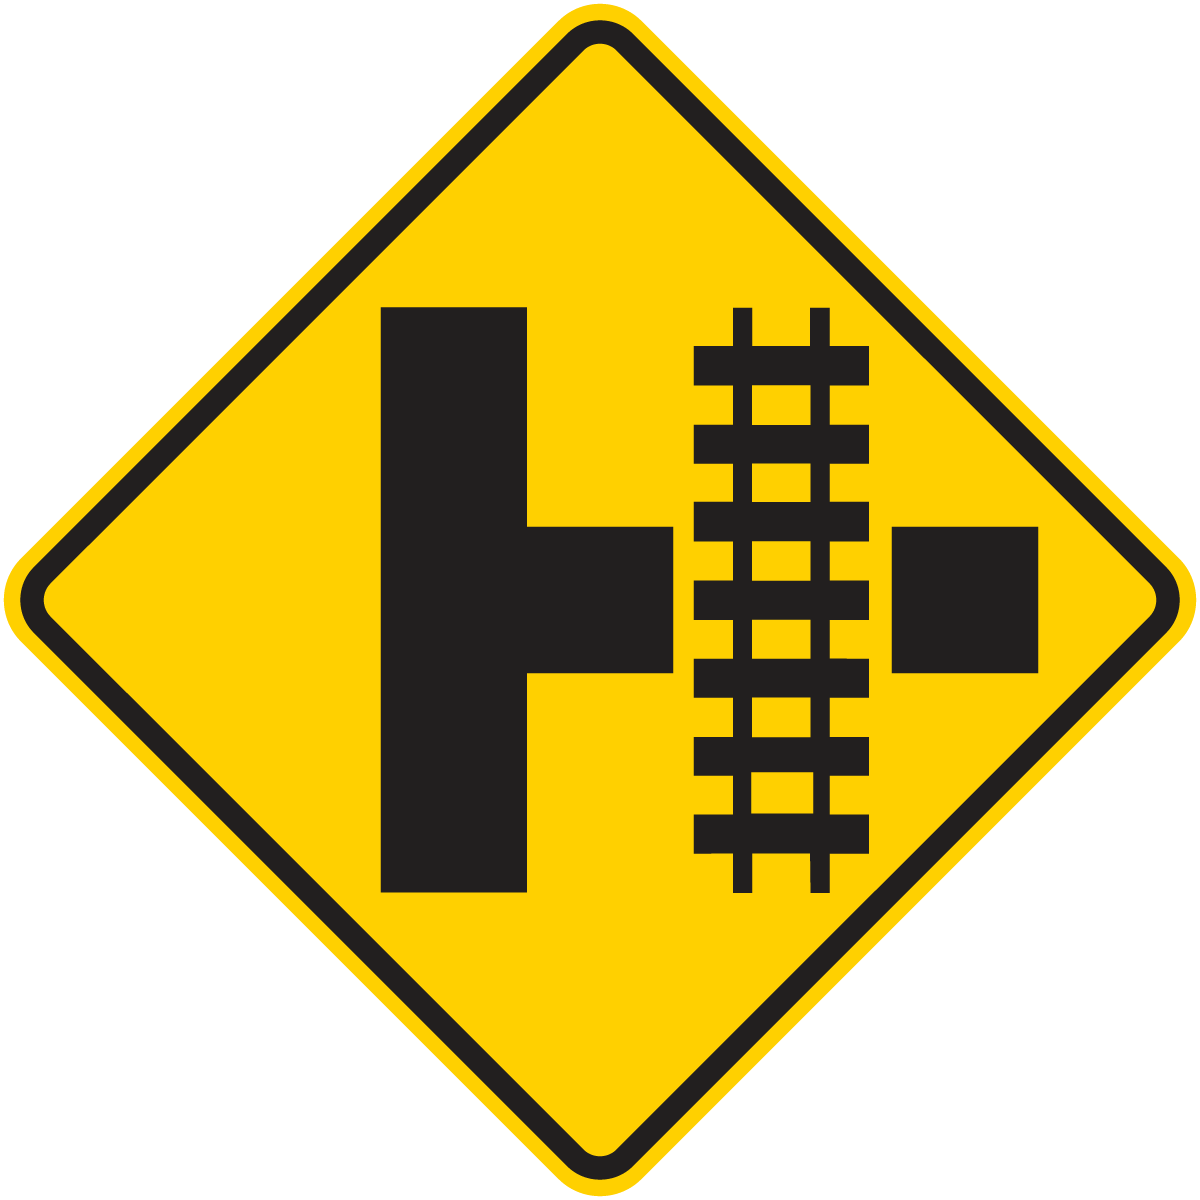 W10-3 Railroad Crossing (On Side Road) (Left or Right)